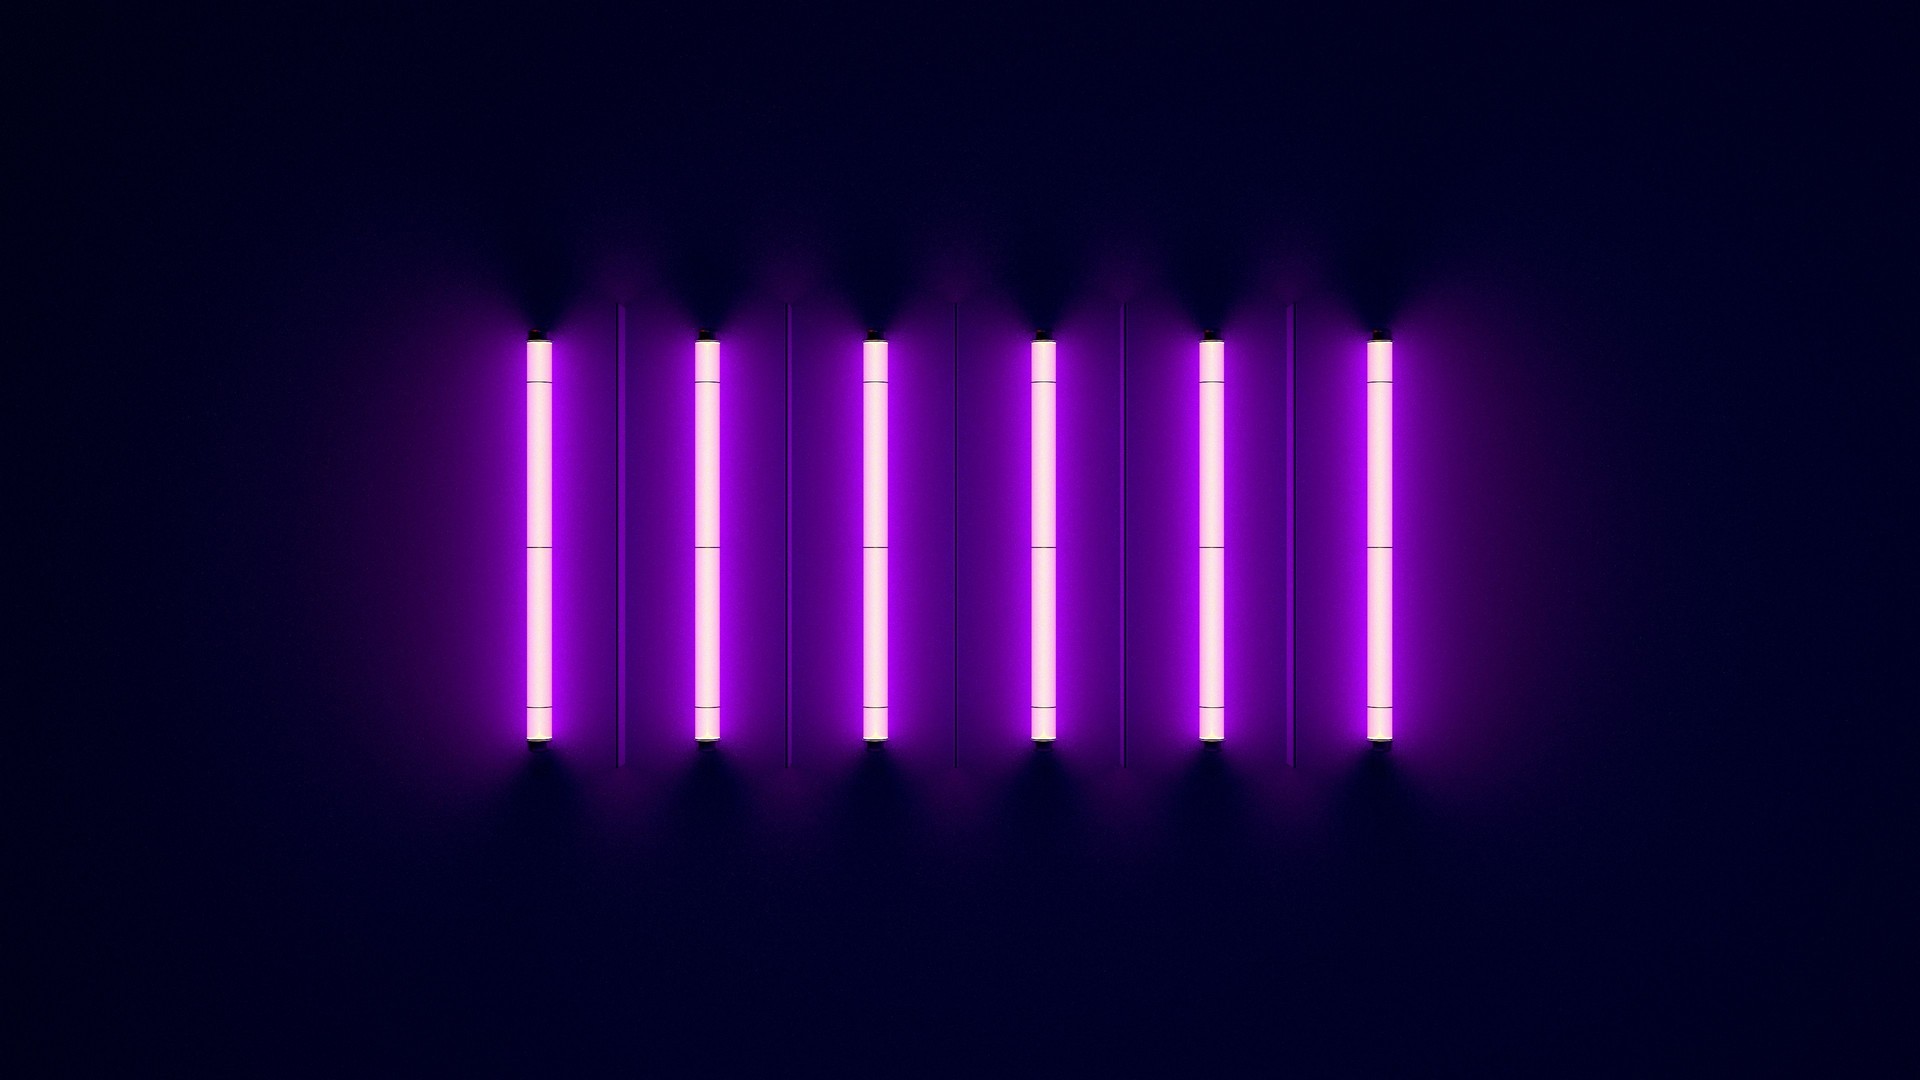 Best Neon Purple Wallpaper HD with high-resolution 1920x1080 pixel. You can use this wallpaper for your Desktop Computer Backgrounds, Mac Wallpapers, Android Lock screen or iPhone Screensavers and another smartphone device